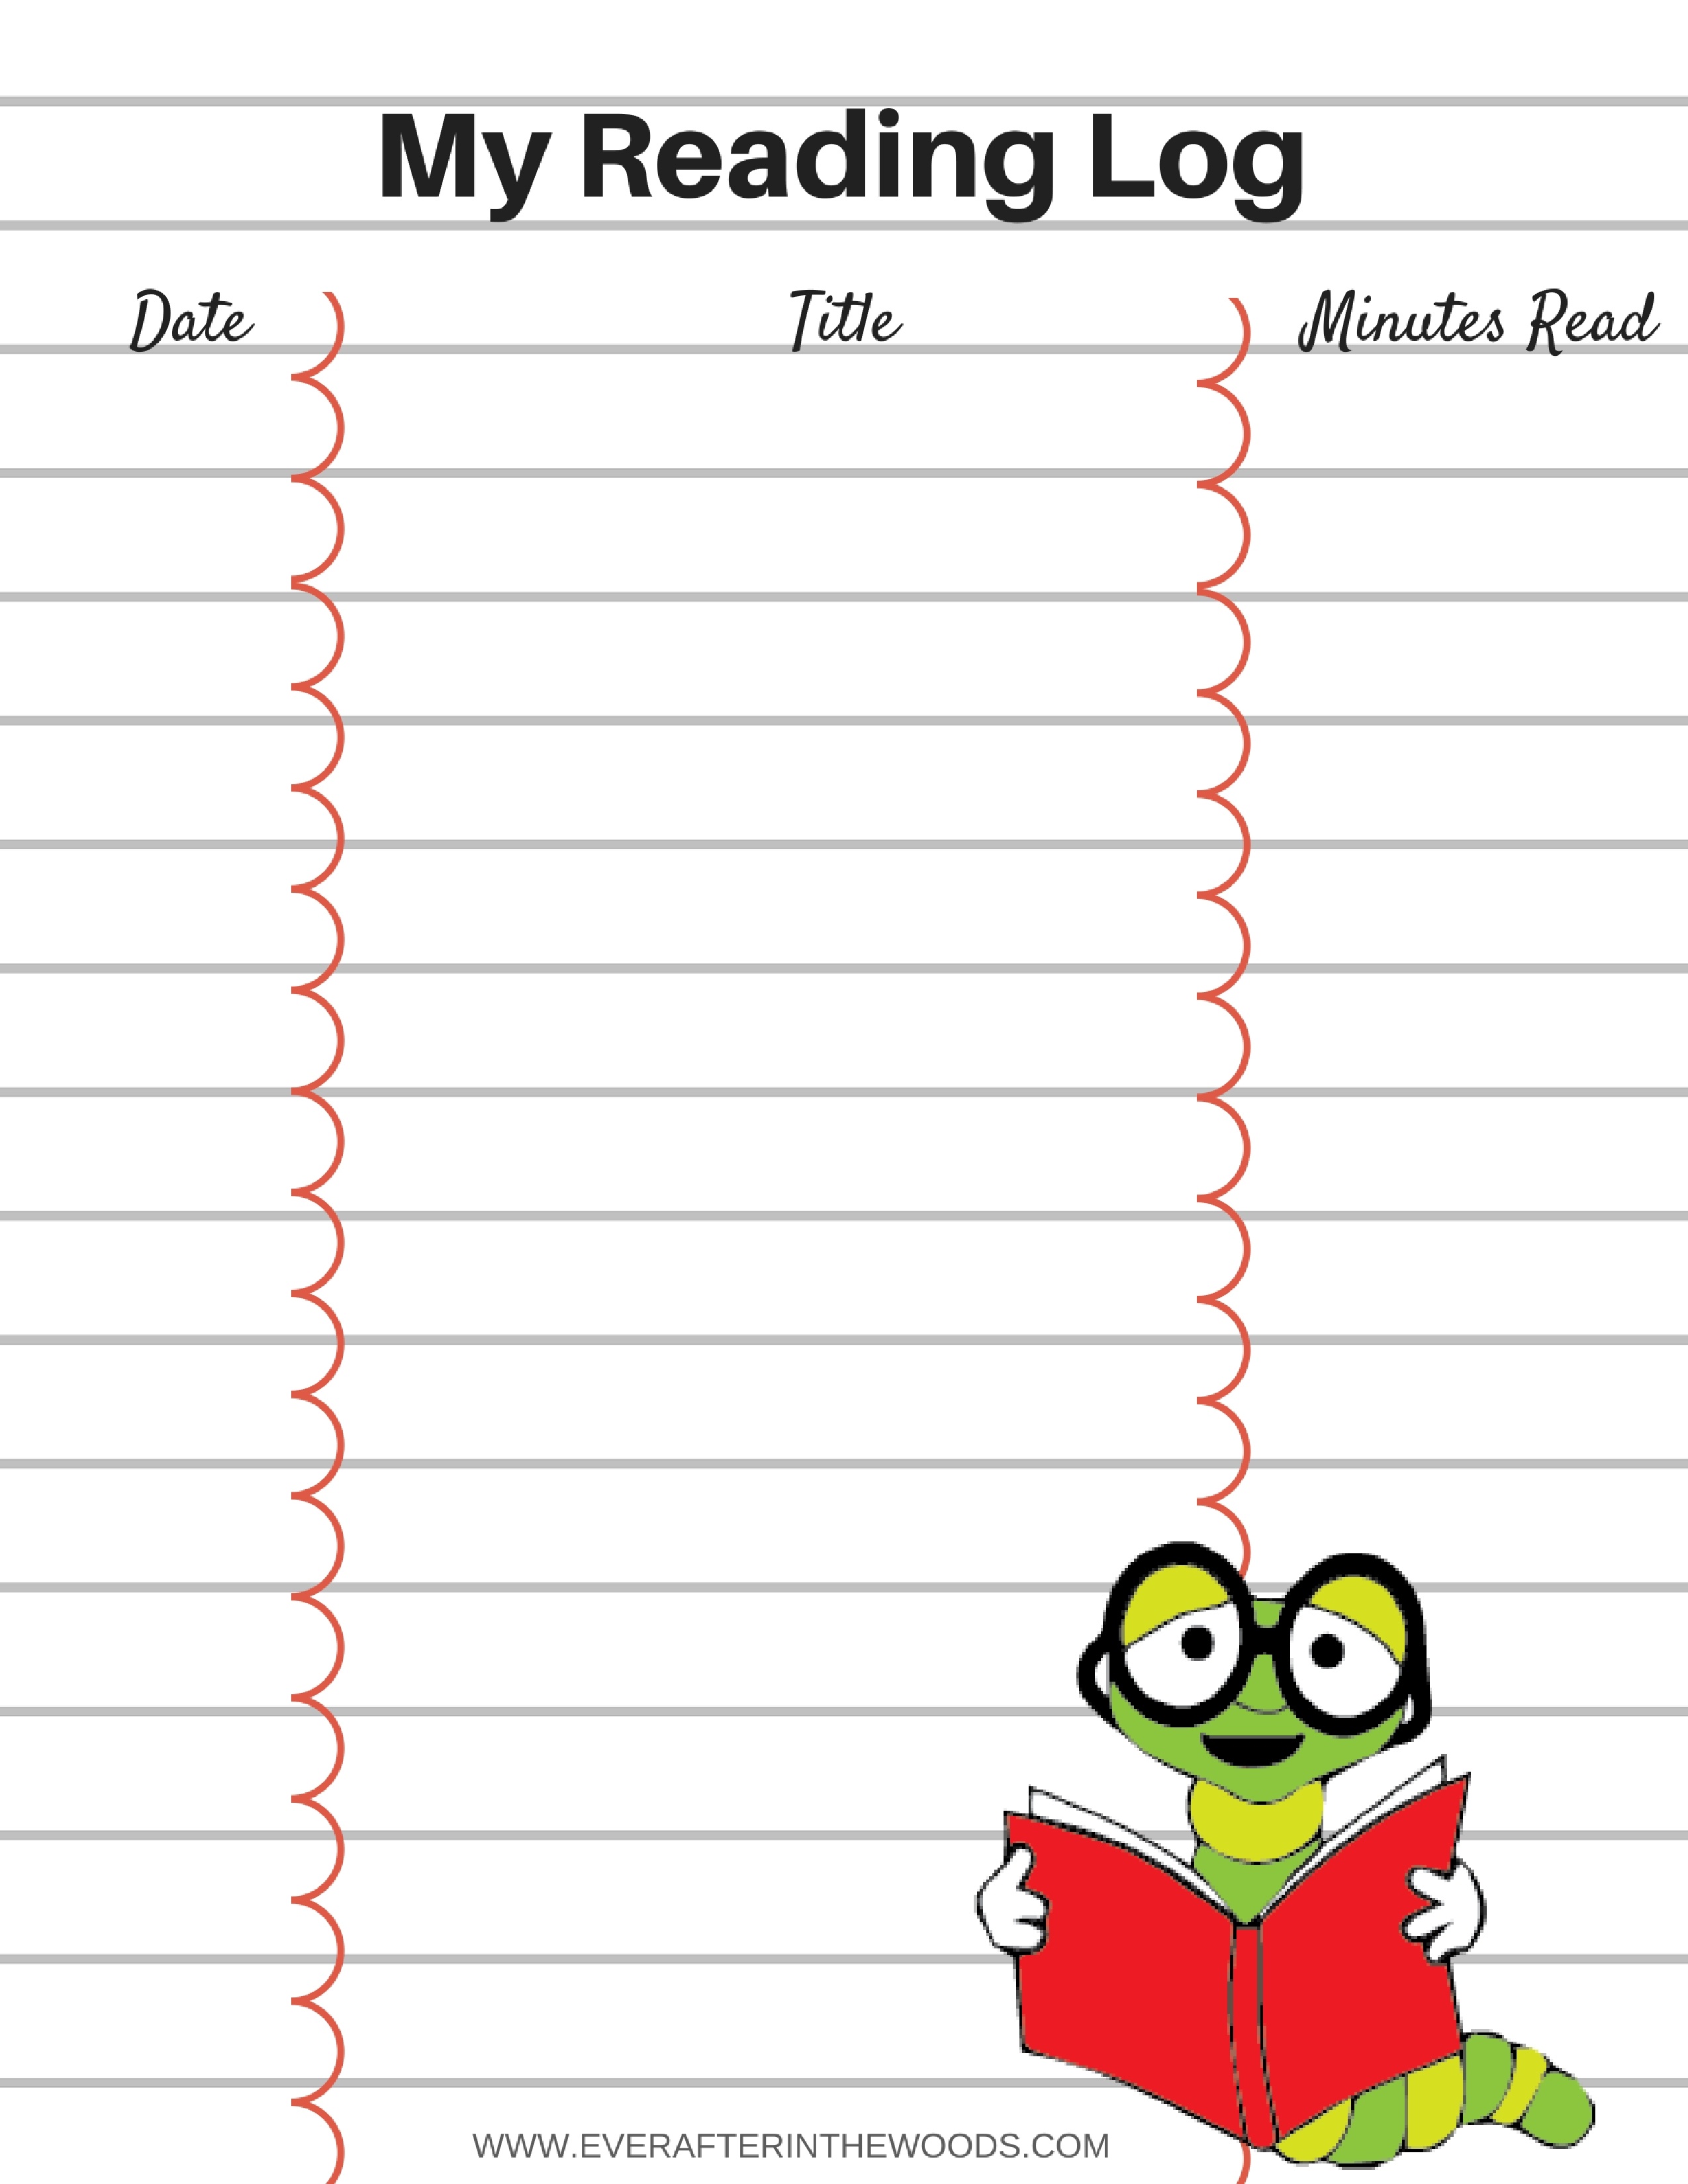 Printable Reading Log For Your Children - Ever After In The Woods - Free Printable Reading Logs For Children